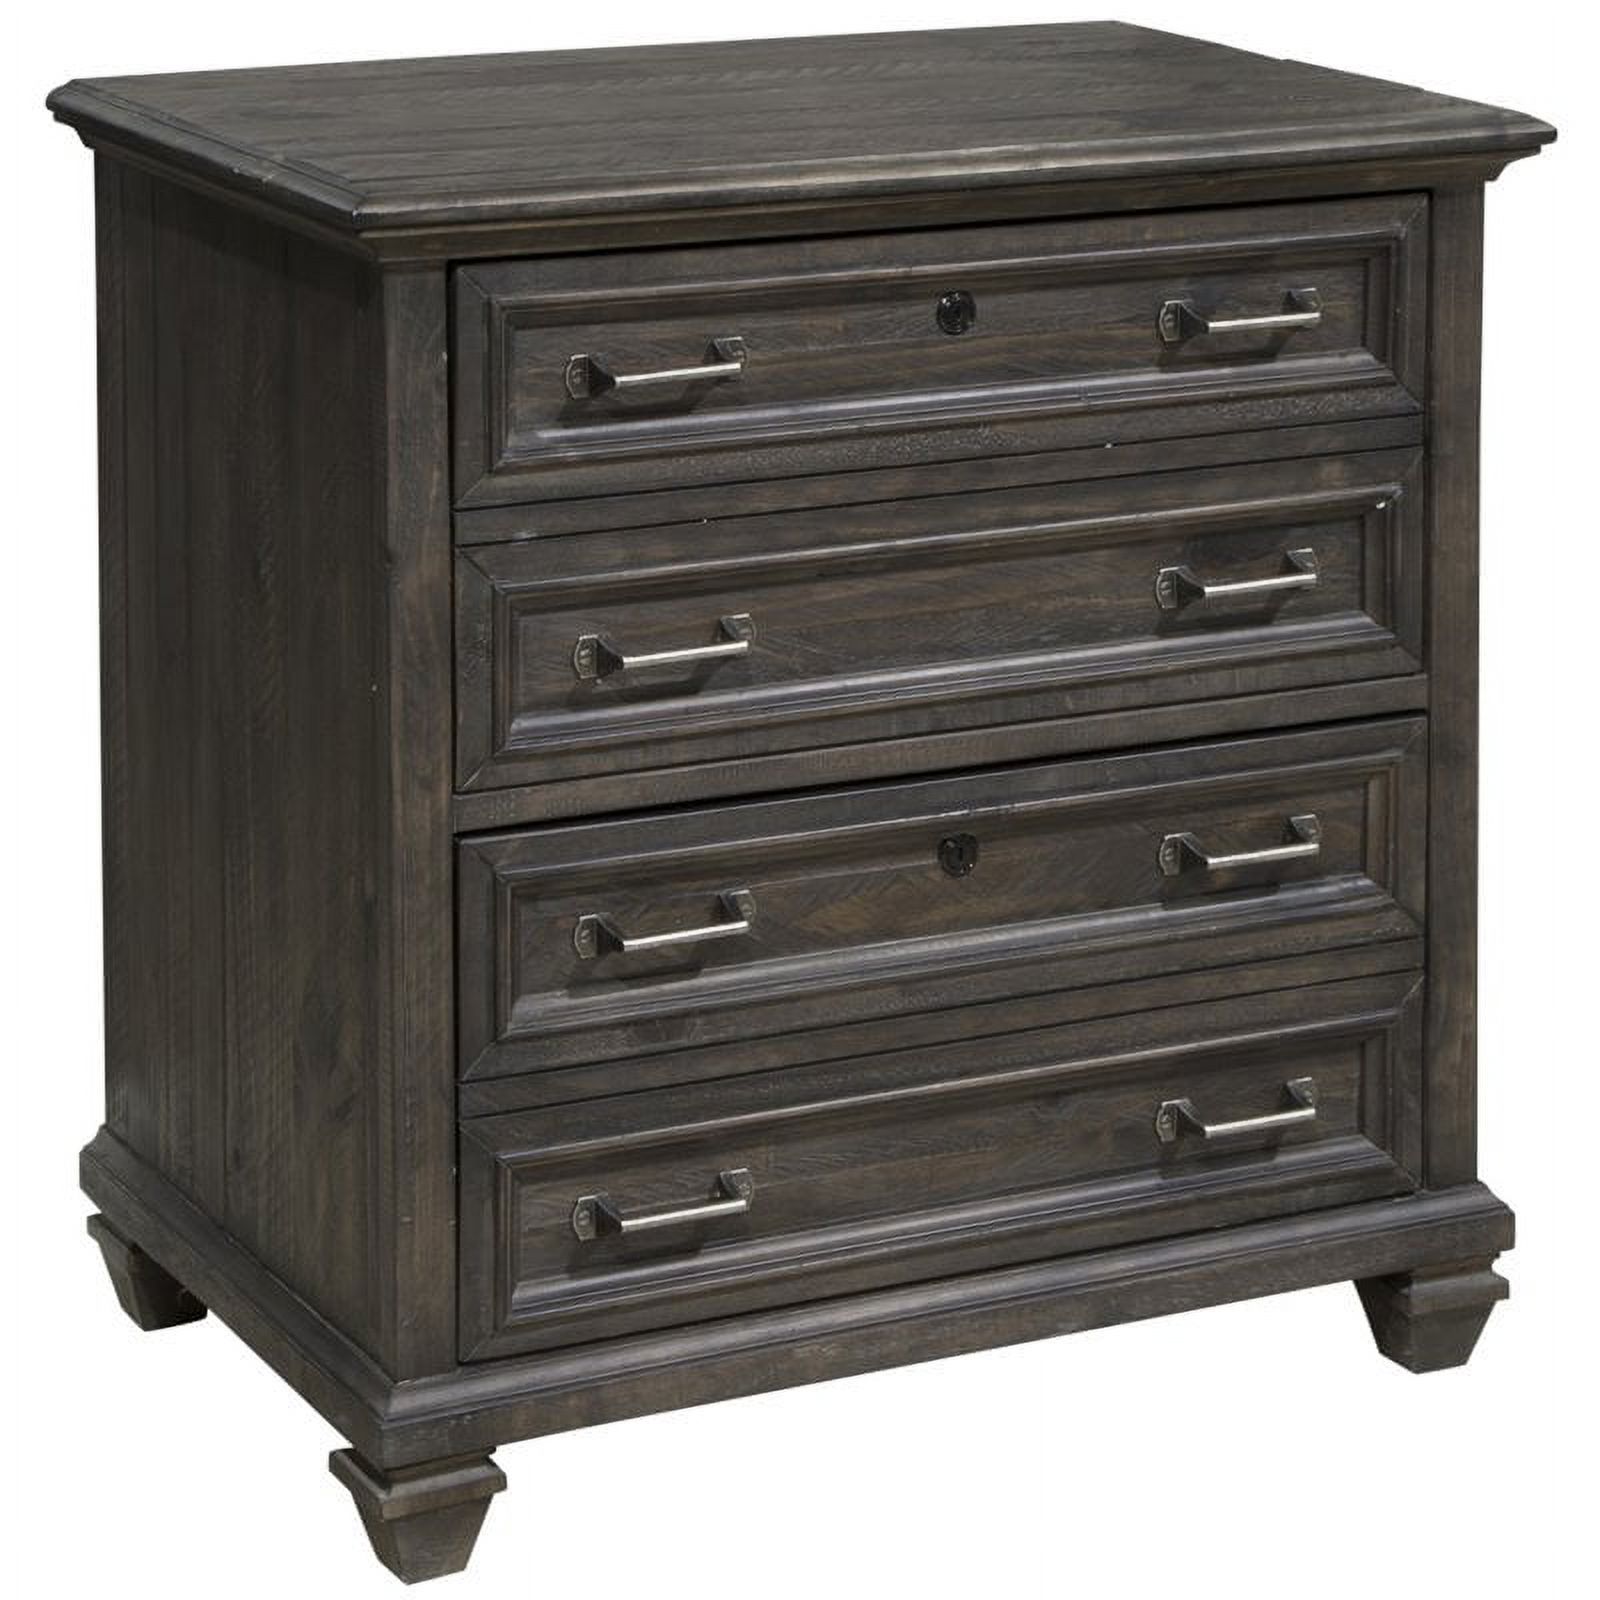 Beaumont Lane 4 Drawer Lateral File Cabinet in Weathered Charcoal - image 1 of 3